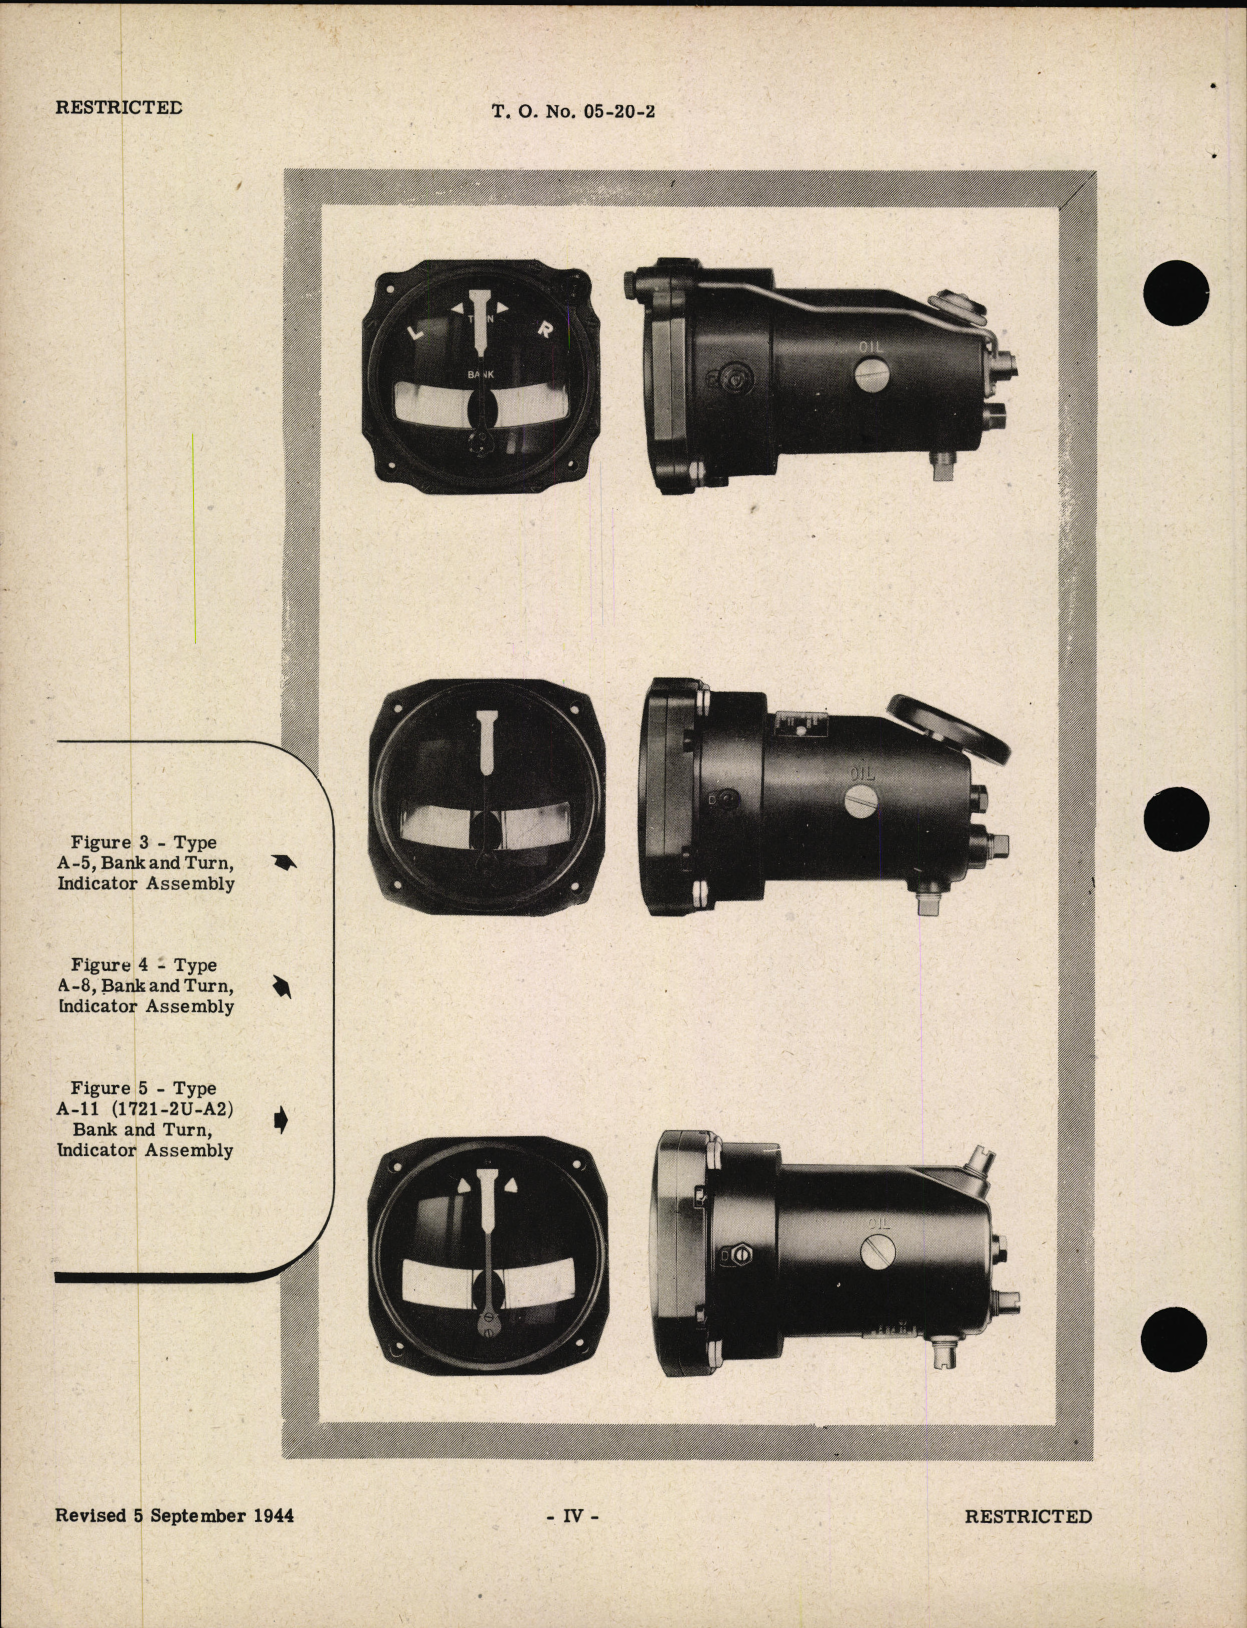 Sample page 6 from AirCorps Library document: Handbook of Instructions with Parts Catalog for Bank and Turn Indicators